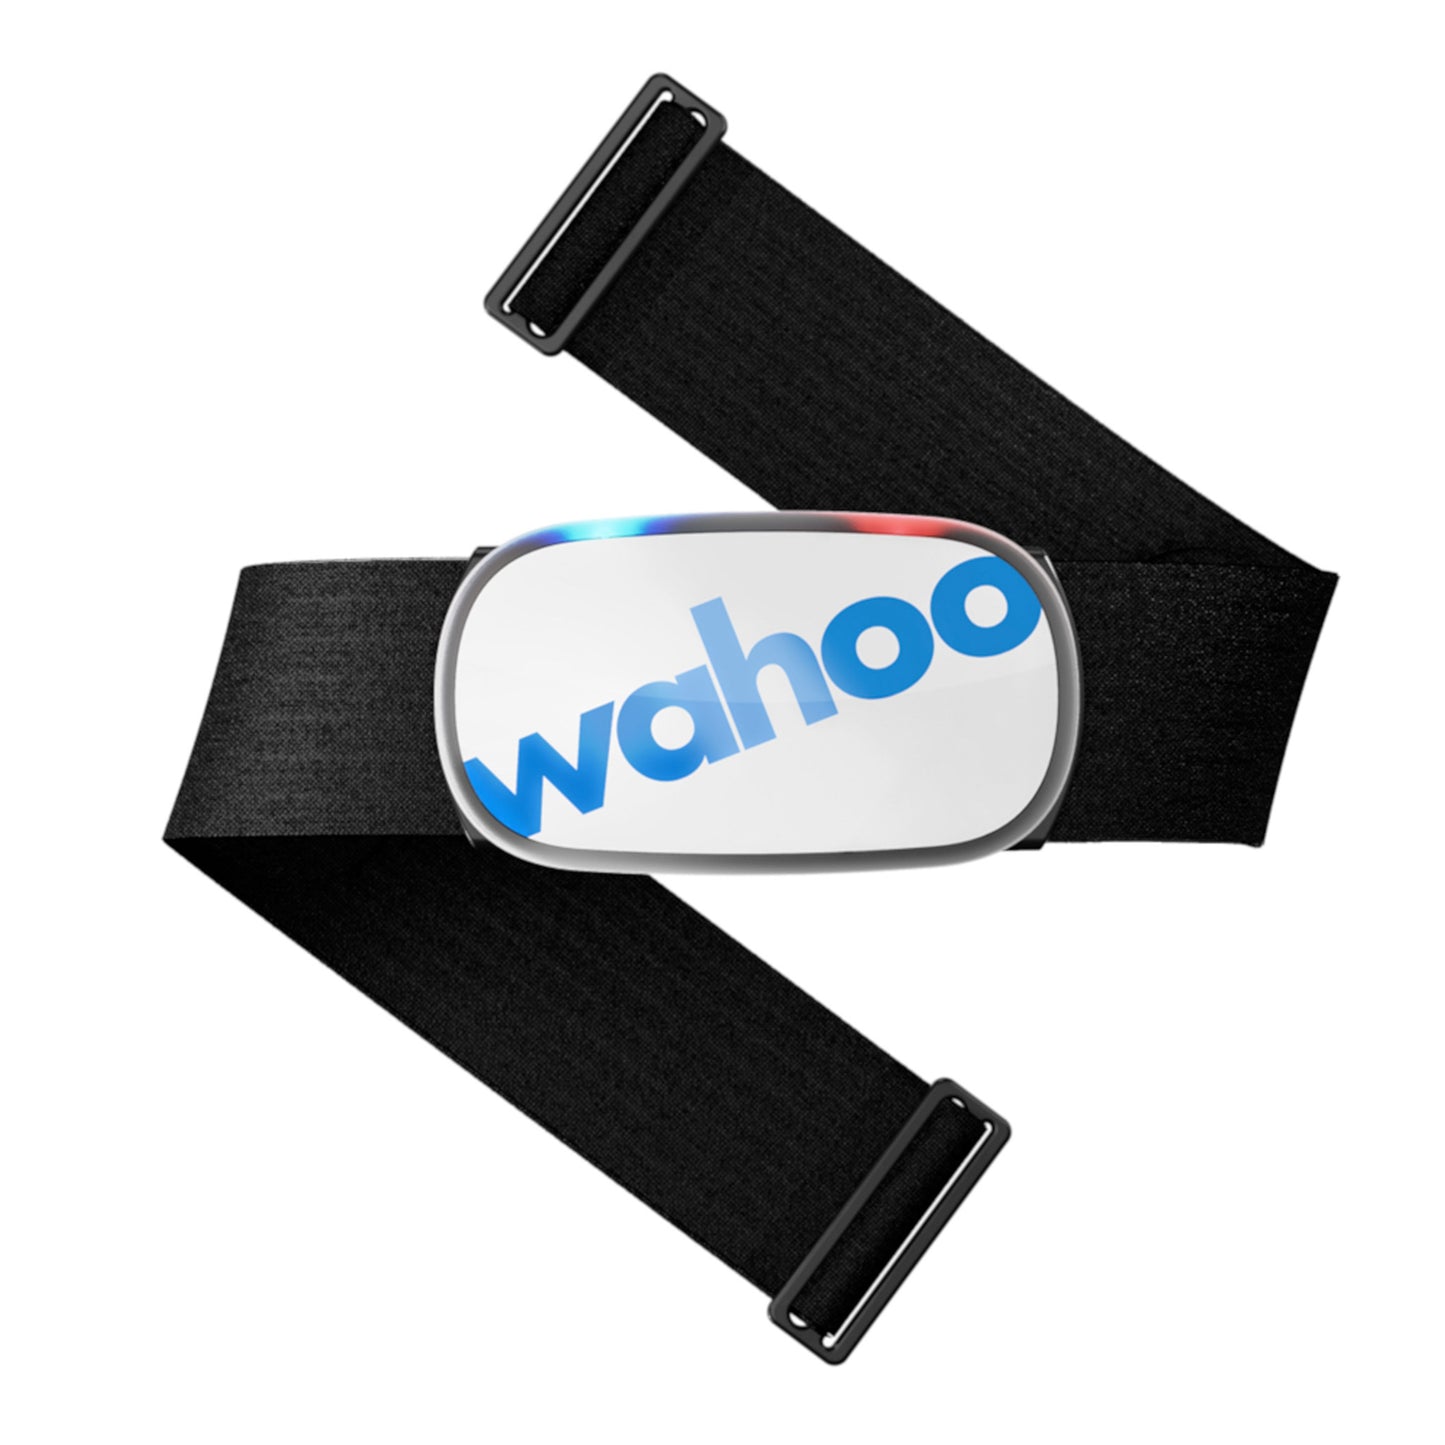 Wahoo TICKR Heart Rate Monitor - GEN 2 White buy now at Woolys Wheels Sydney